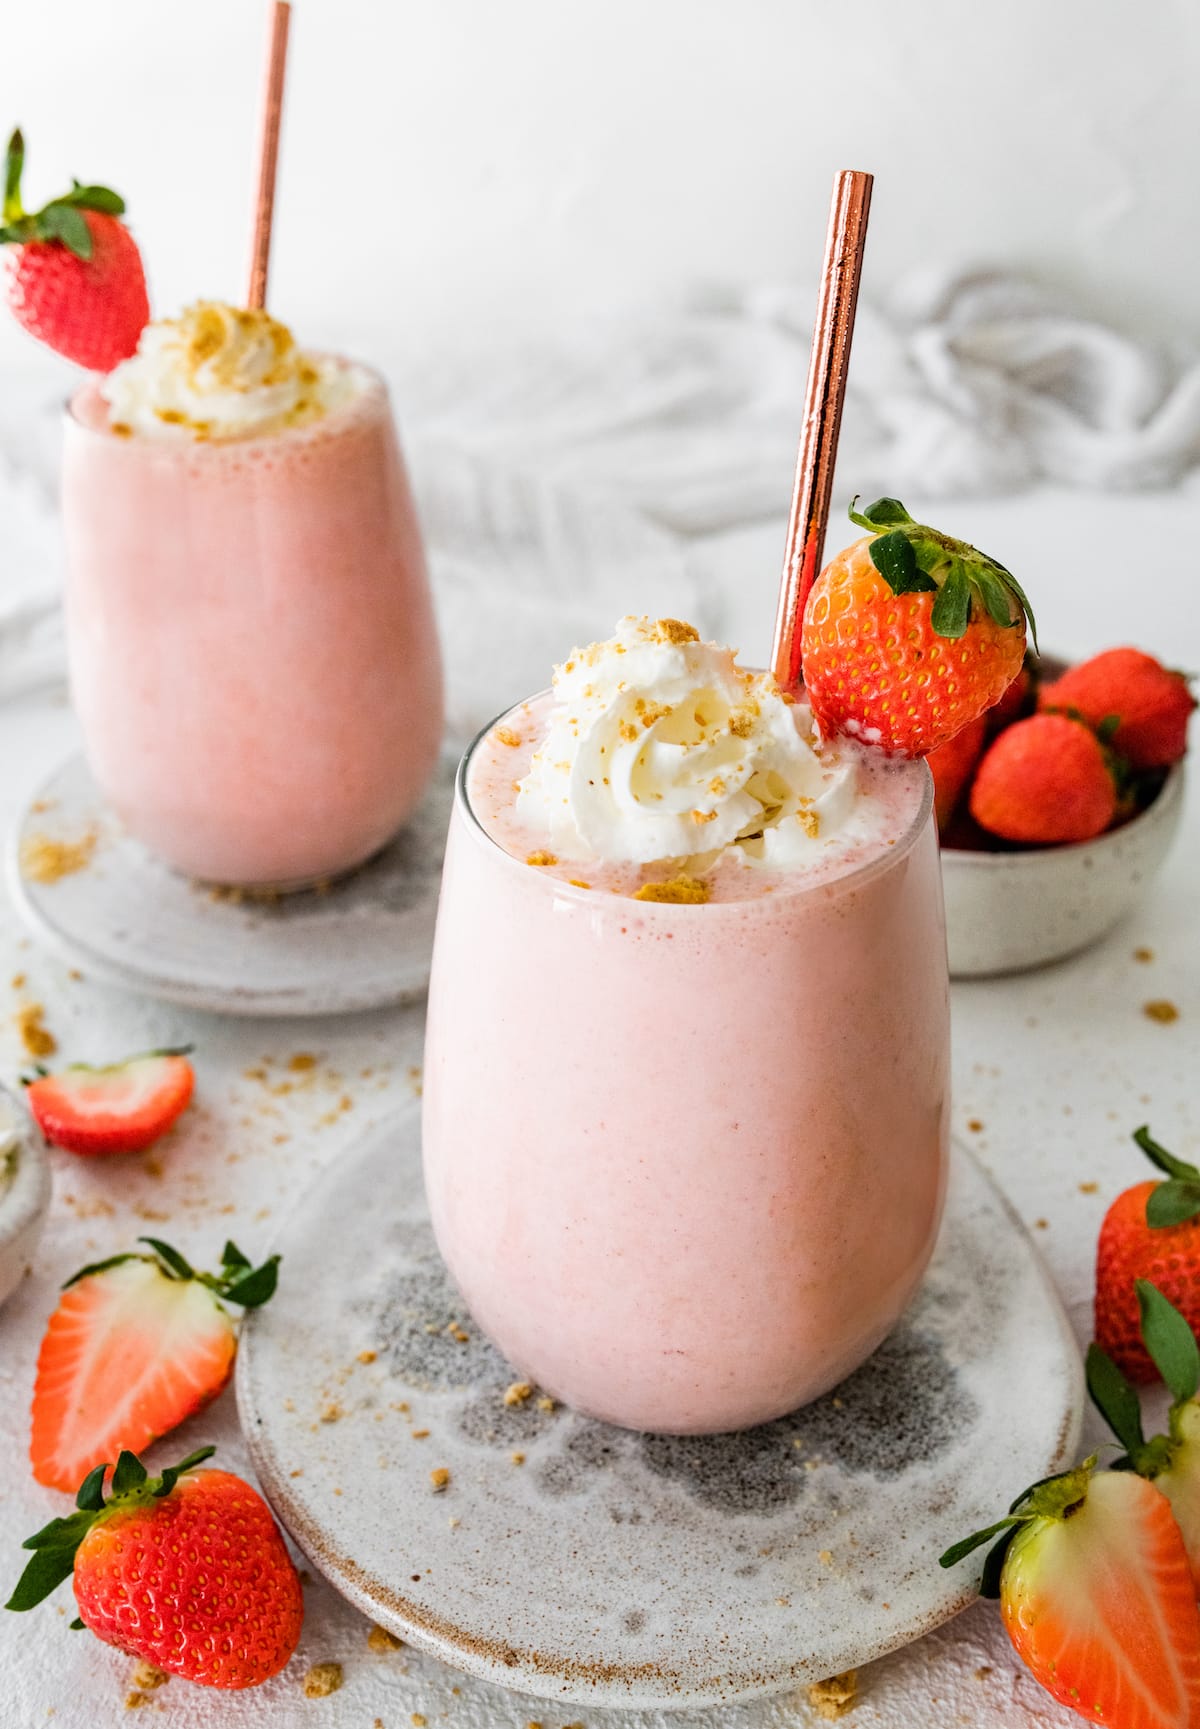 Two strawberry cheesecake shakes with straws, topped with whipped cream, whole grain crackers and fresh strawberries.